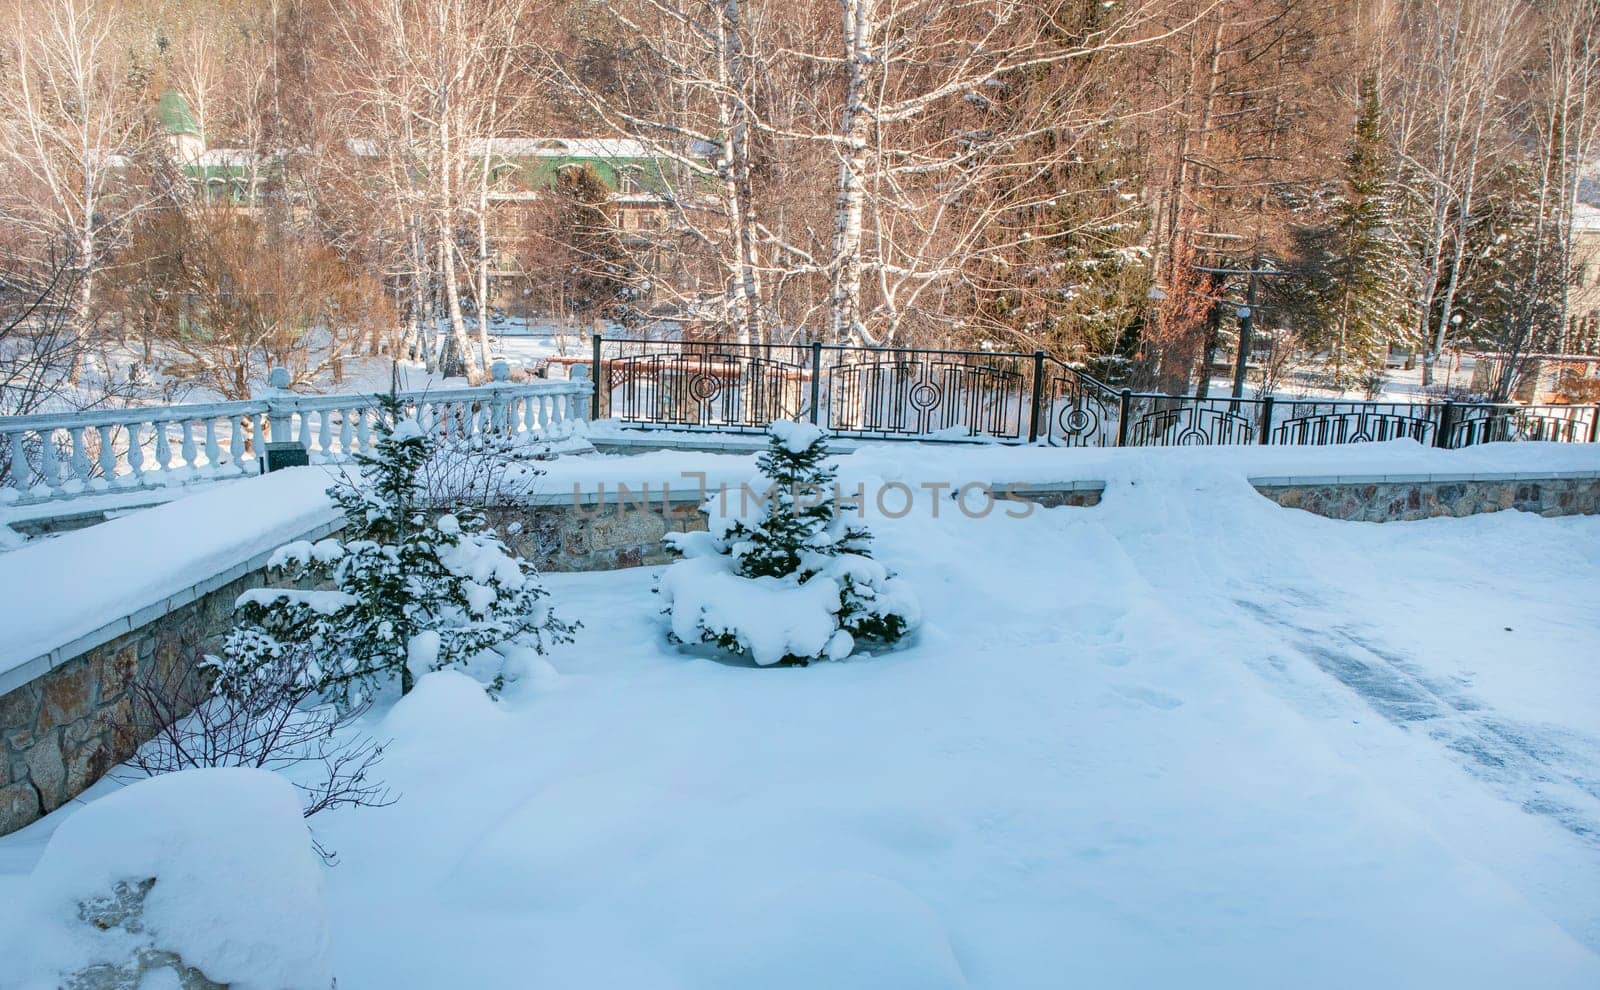 A snow-covered park with a stone balustrade and fence is visible, the house is visible through the trees in the background, in a charming winter landscape.